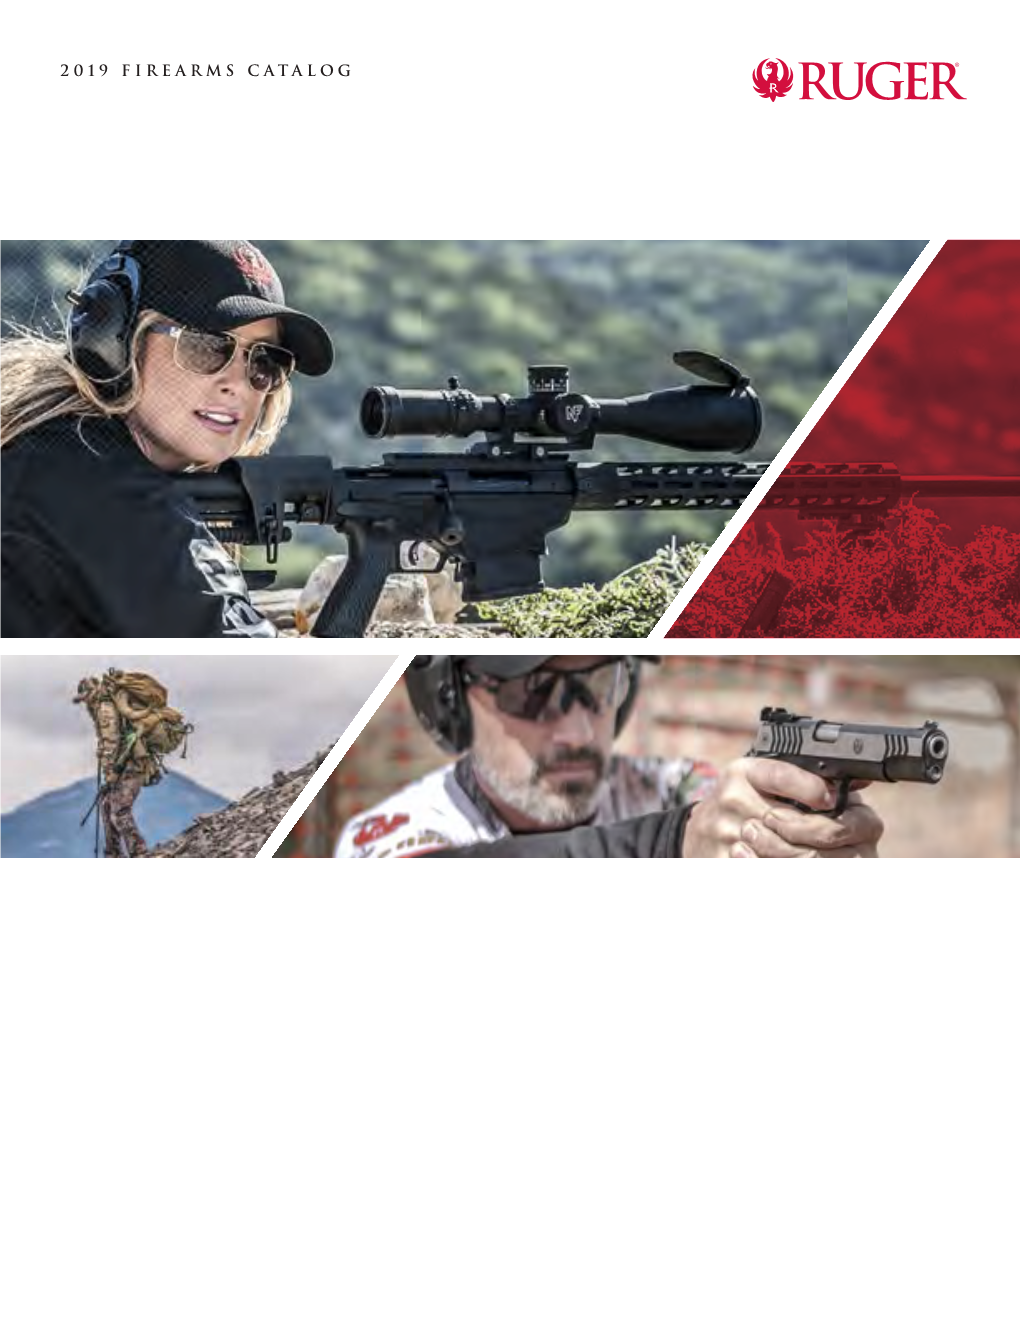 Ruger Firearms Catalogue 2019